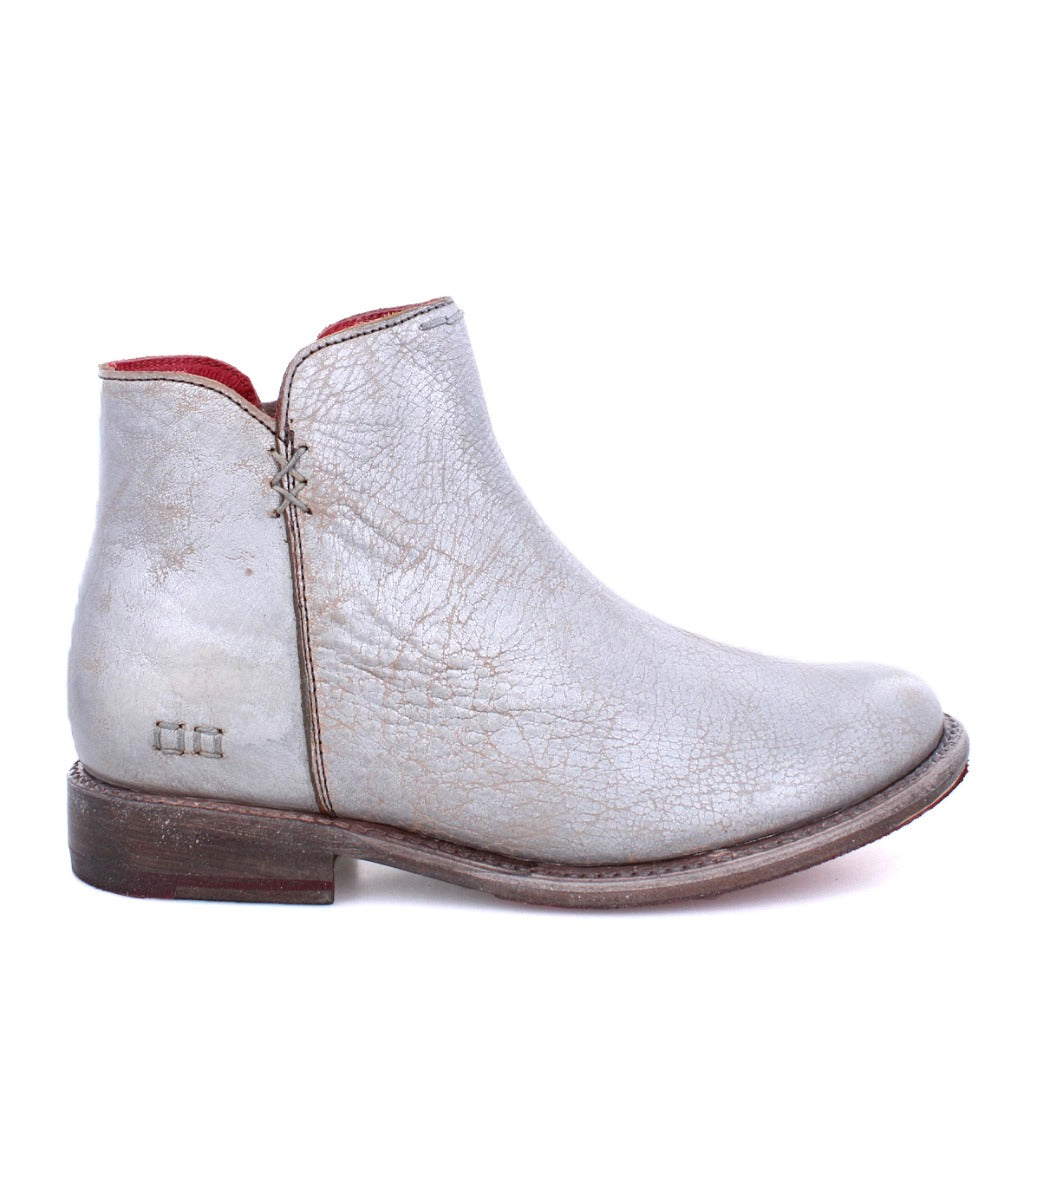 A women's Yurisa silver ankle boot by Bed Stu with a red sole.